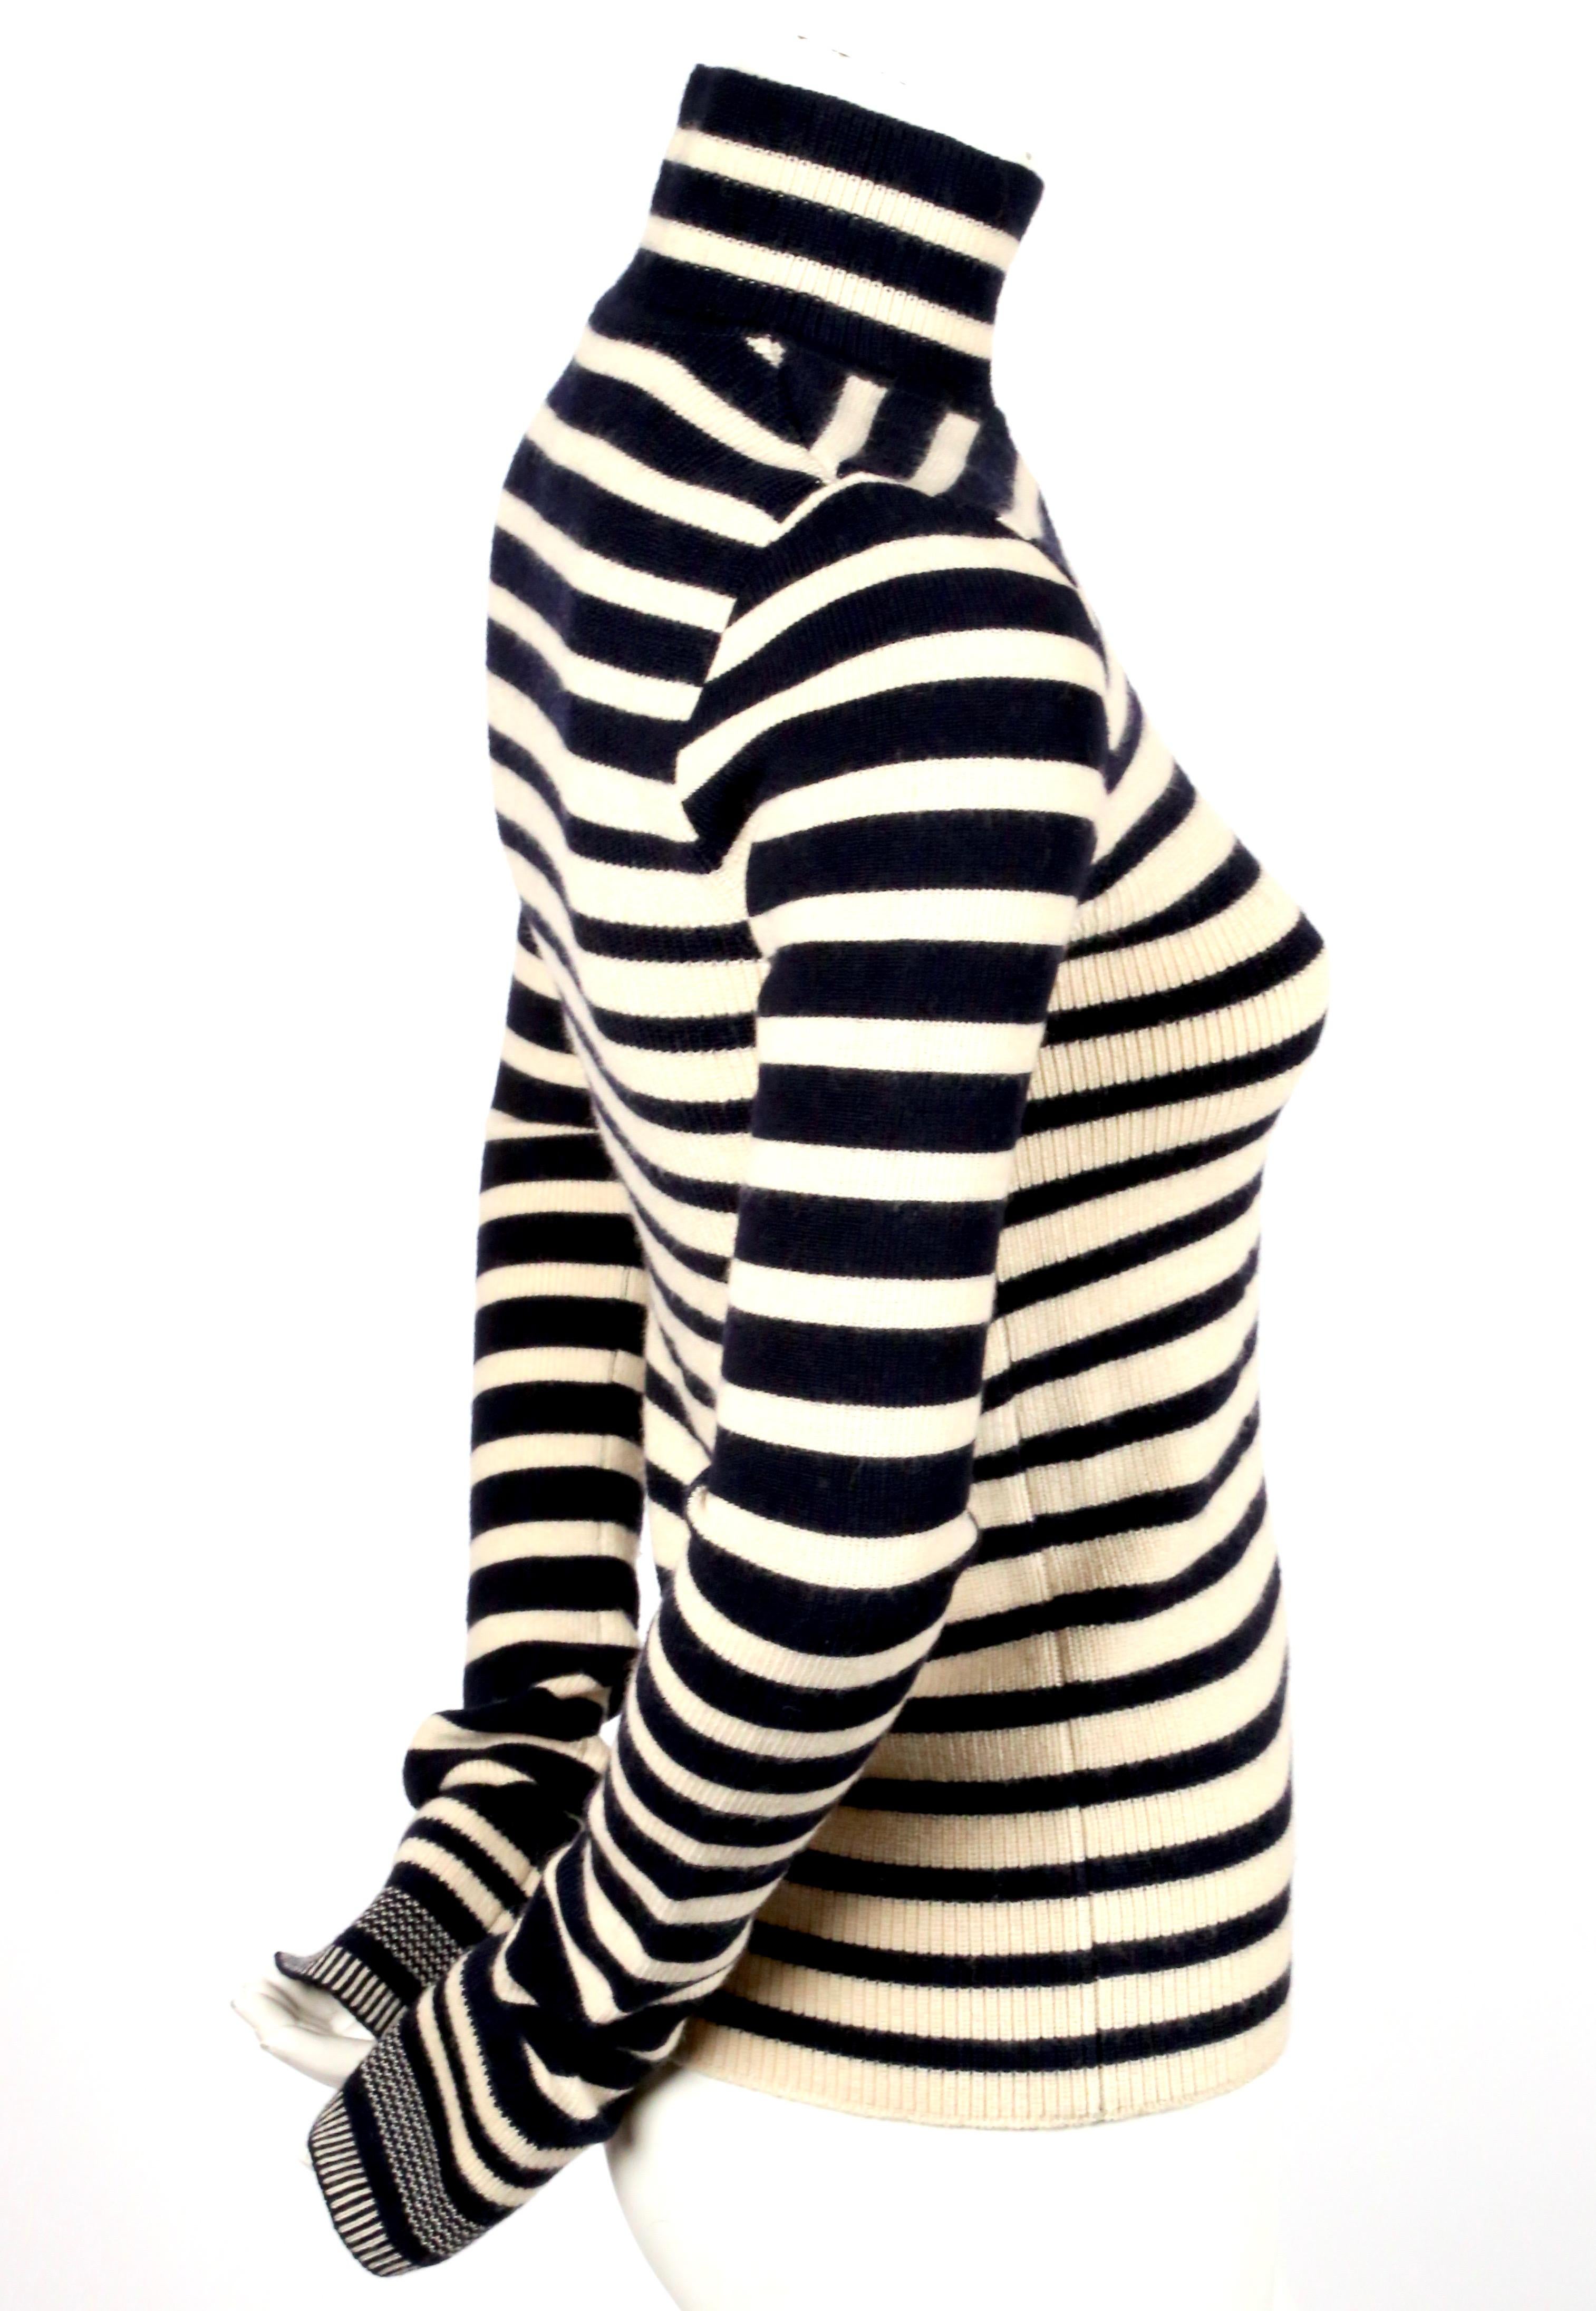 Deepest navy blue and cream striped wool turtleneck sweater with enameled buttons designed by Nicolas Ghesquiere for Balenciaga as seen on the fall 2007 runway. French size 36. Approximate measurements (unstretched): shoulder 13